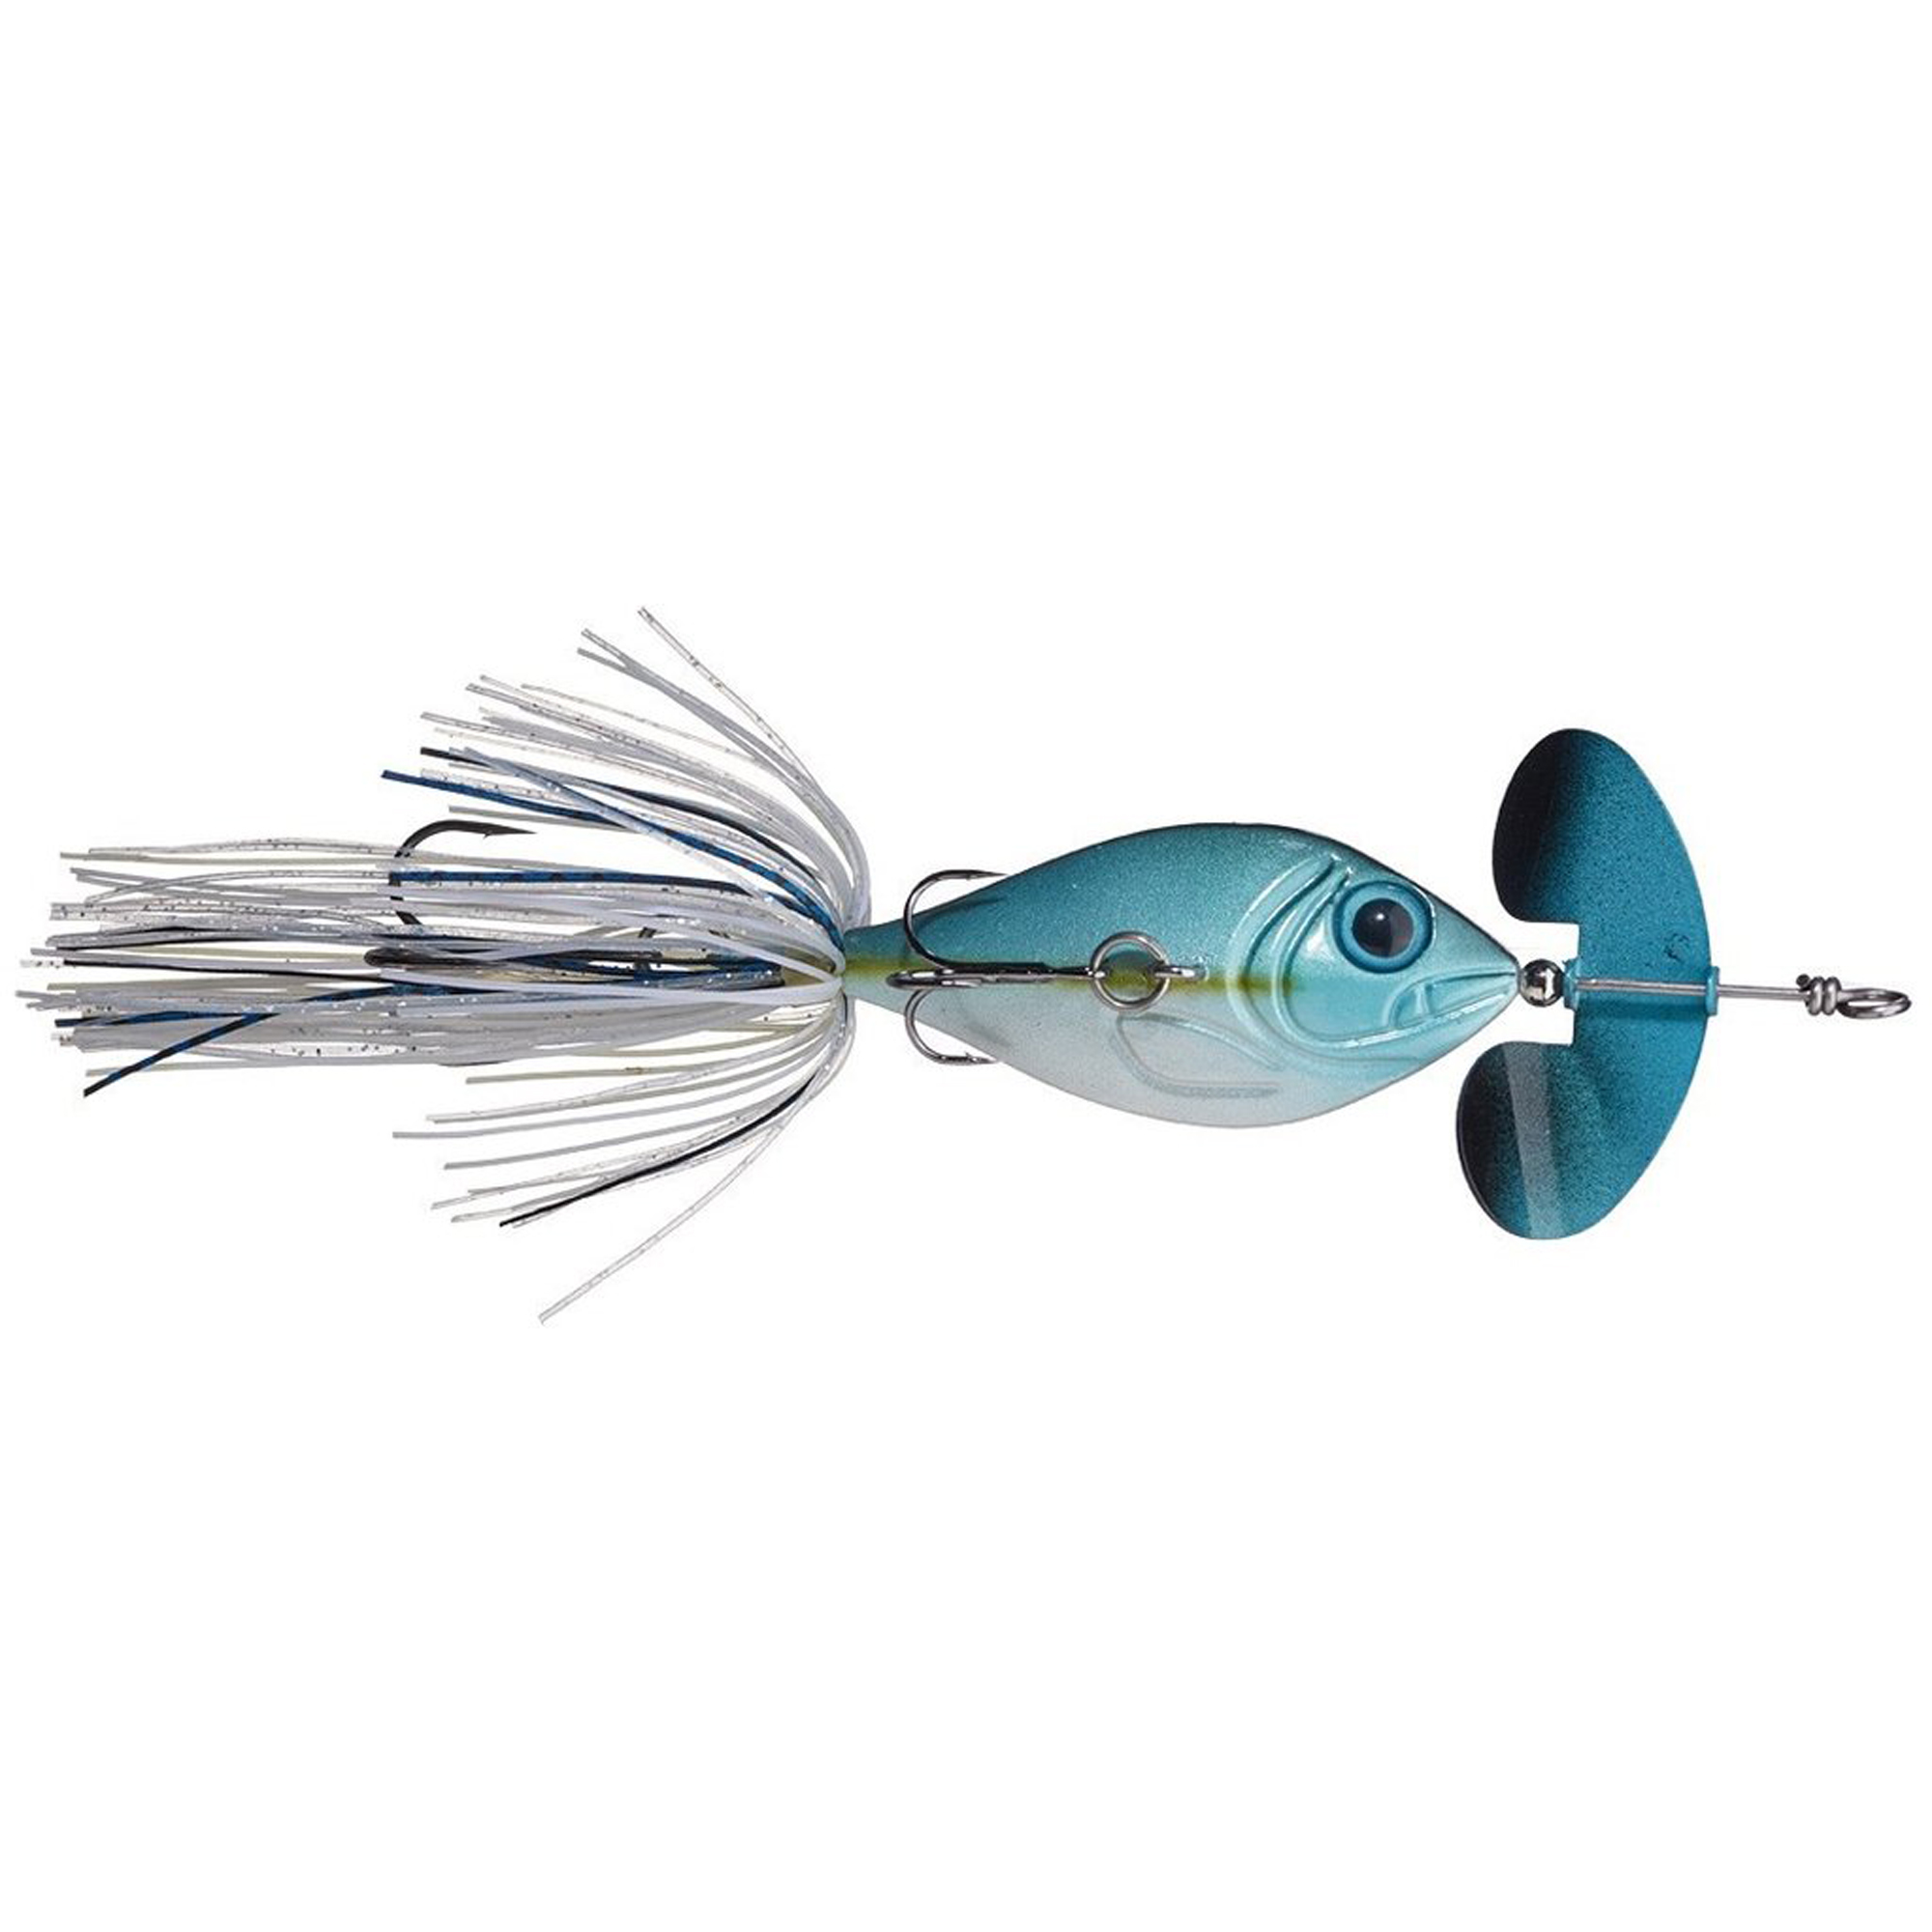 https://www.windingcreekbait.com/store_content/products_media/5dae042a36fca.jpg